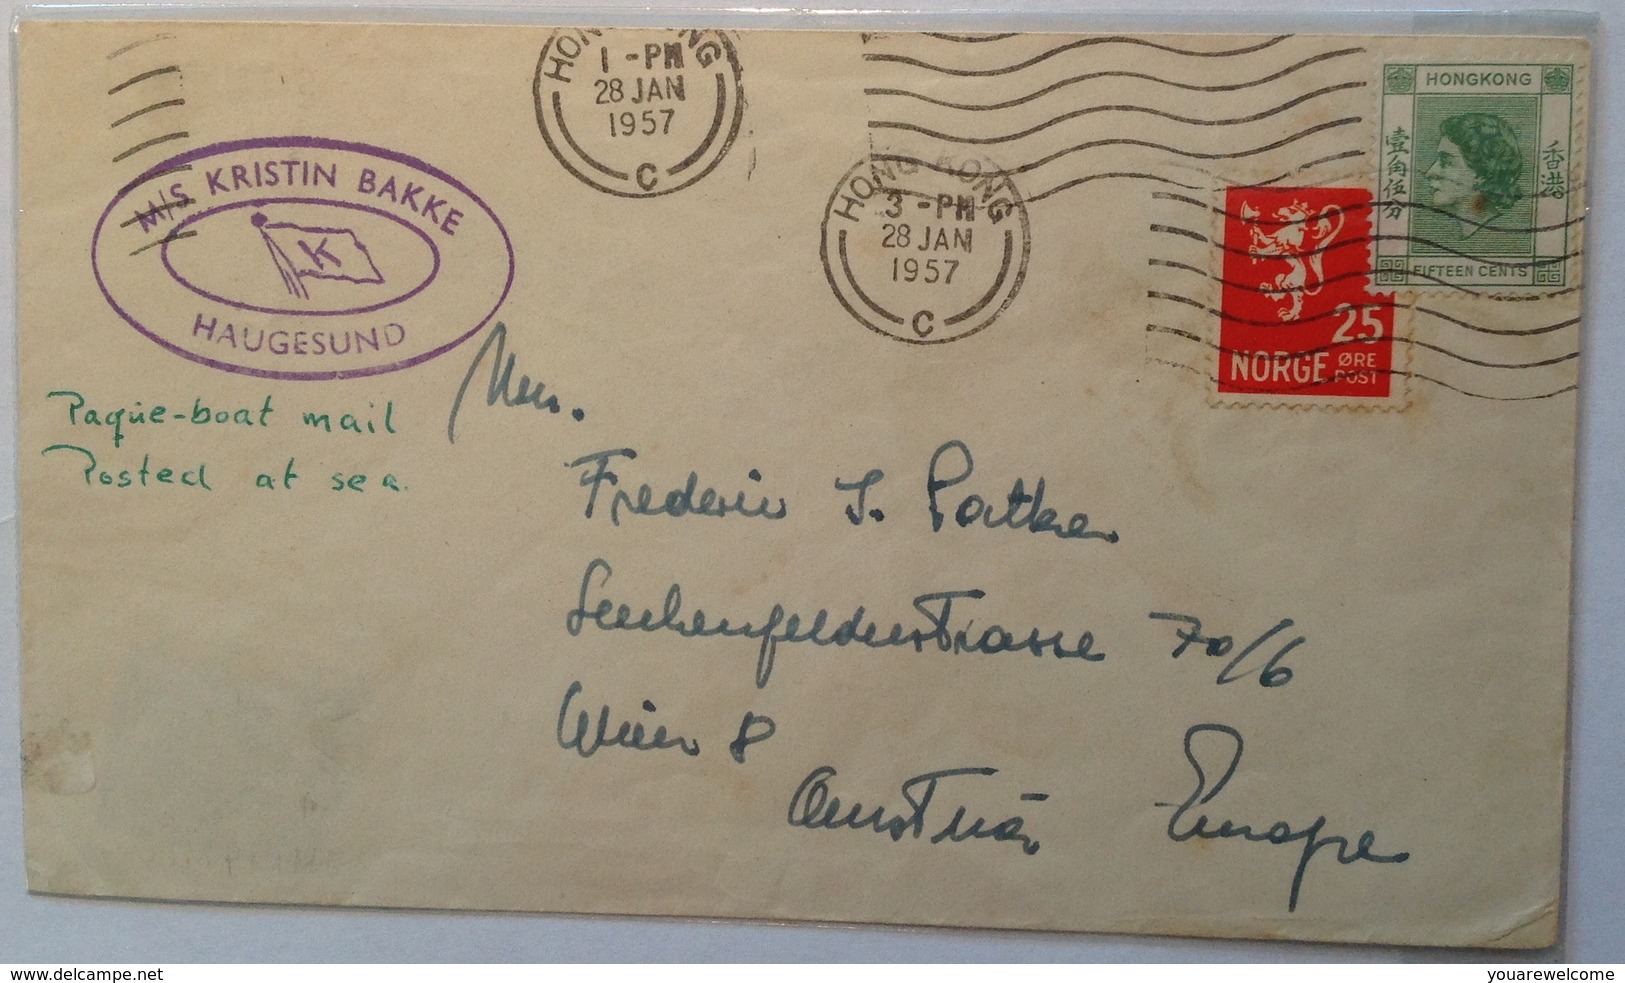 Hong Kong 1957 REAL MIXED FRANKING On PAQUEBOT SHIP MAIL COVER Norway (Haugesund Brief Lettre Norwegen China Chine - Briefe U. Dokumente